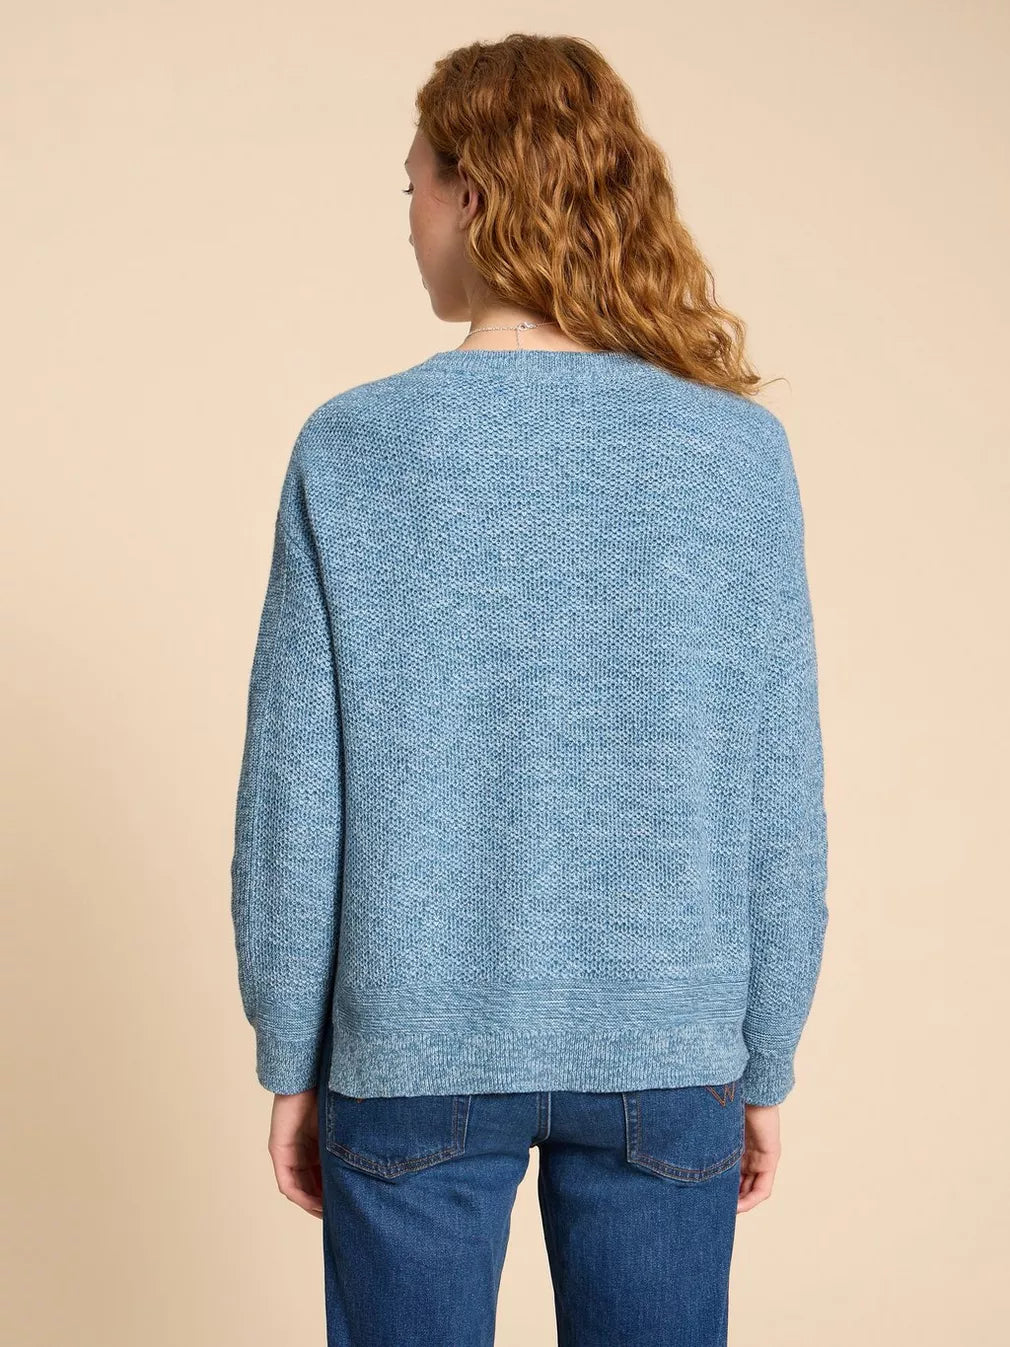 White Stuff Northbank Jumper - Mid Blue Clothing - Tops - Sweaters - Pullovers - Heavy Knit Pullovers by White Stuff | Grace the Boutique